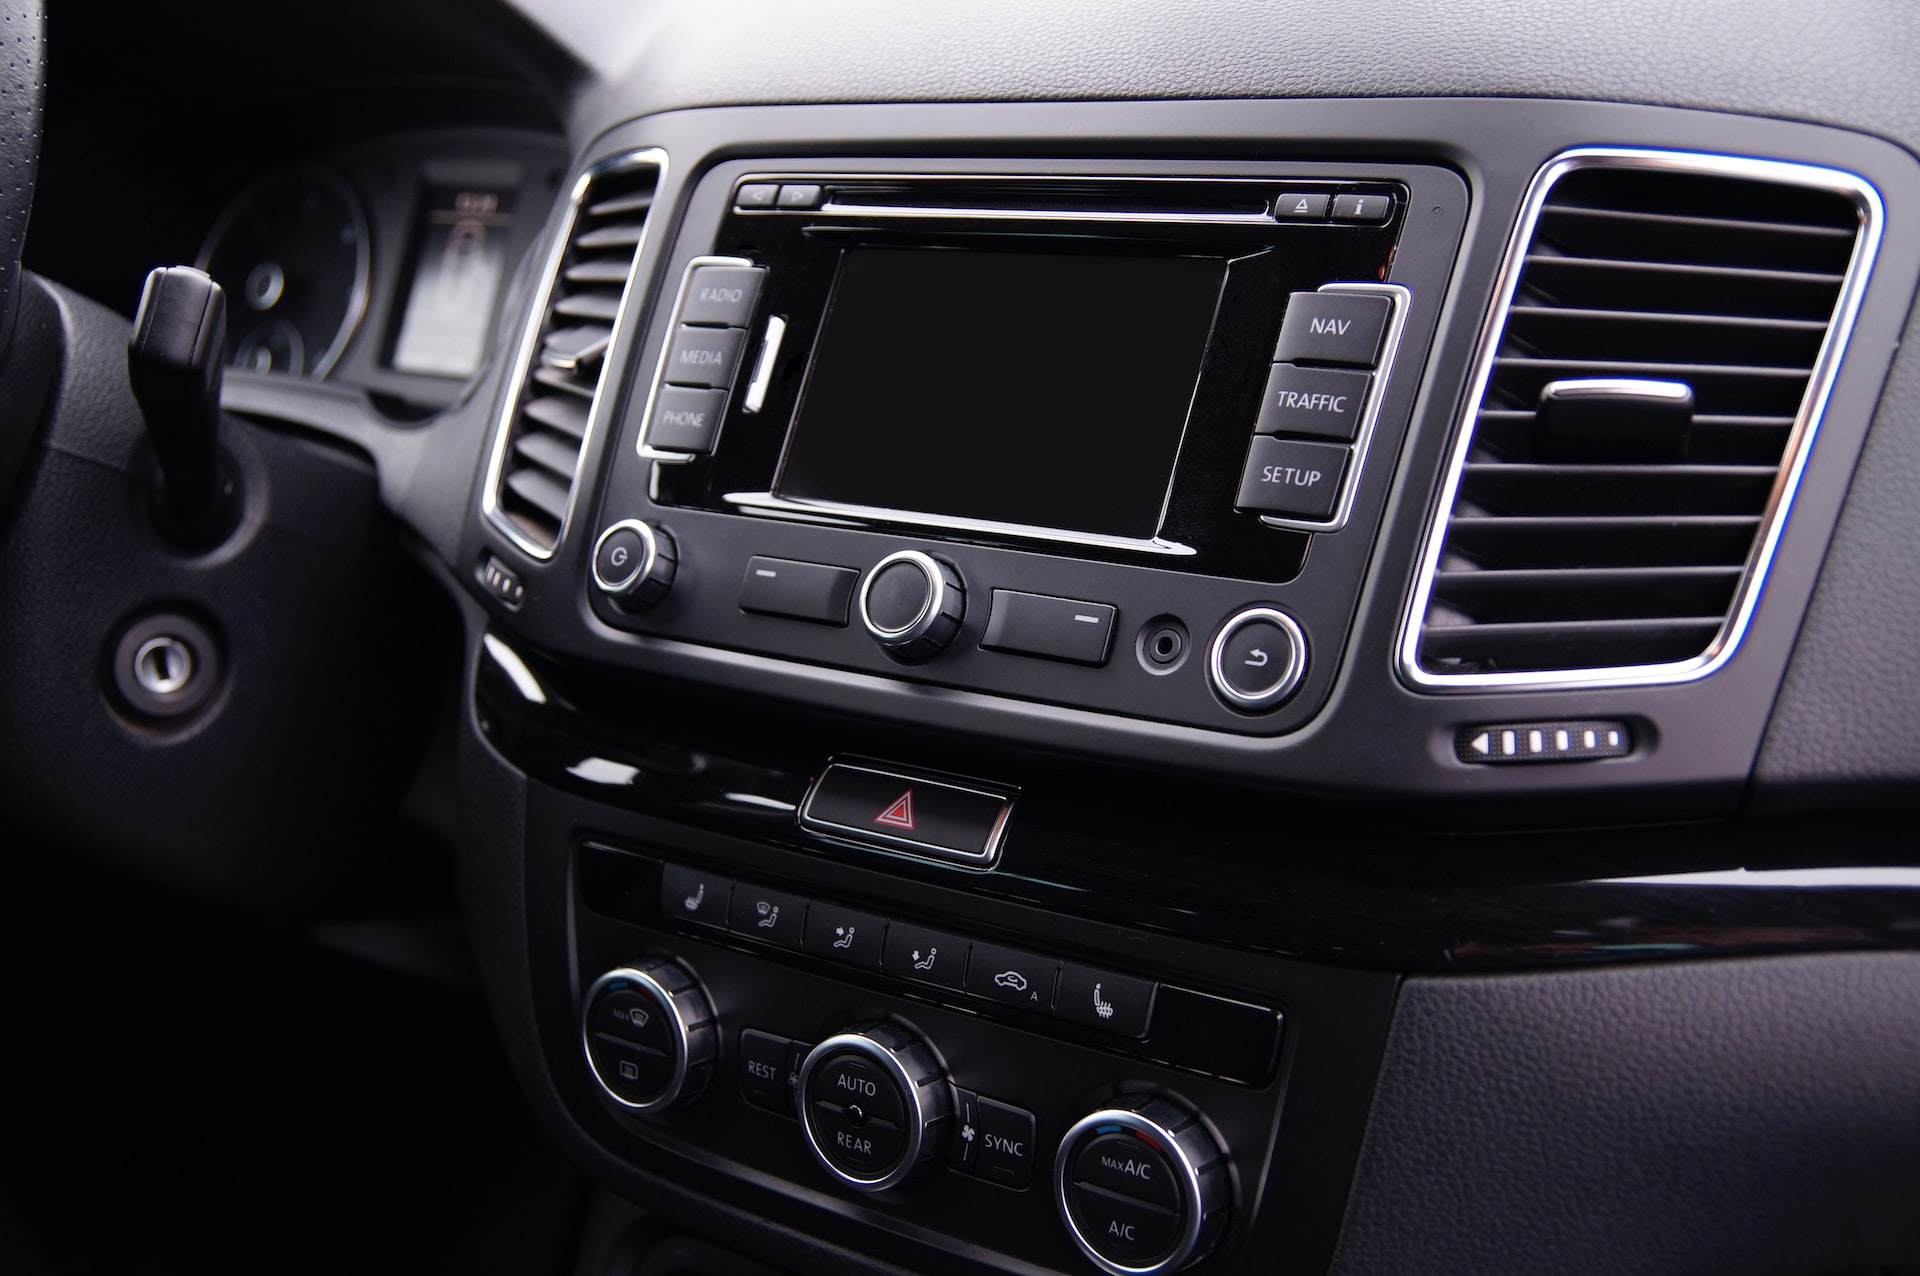 Top 10 Cars With The Best Infotainment Systems